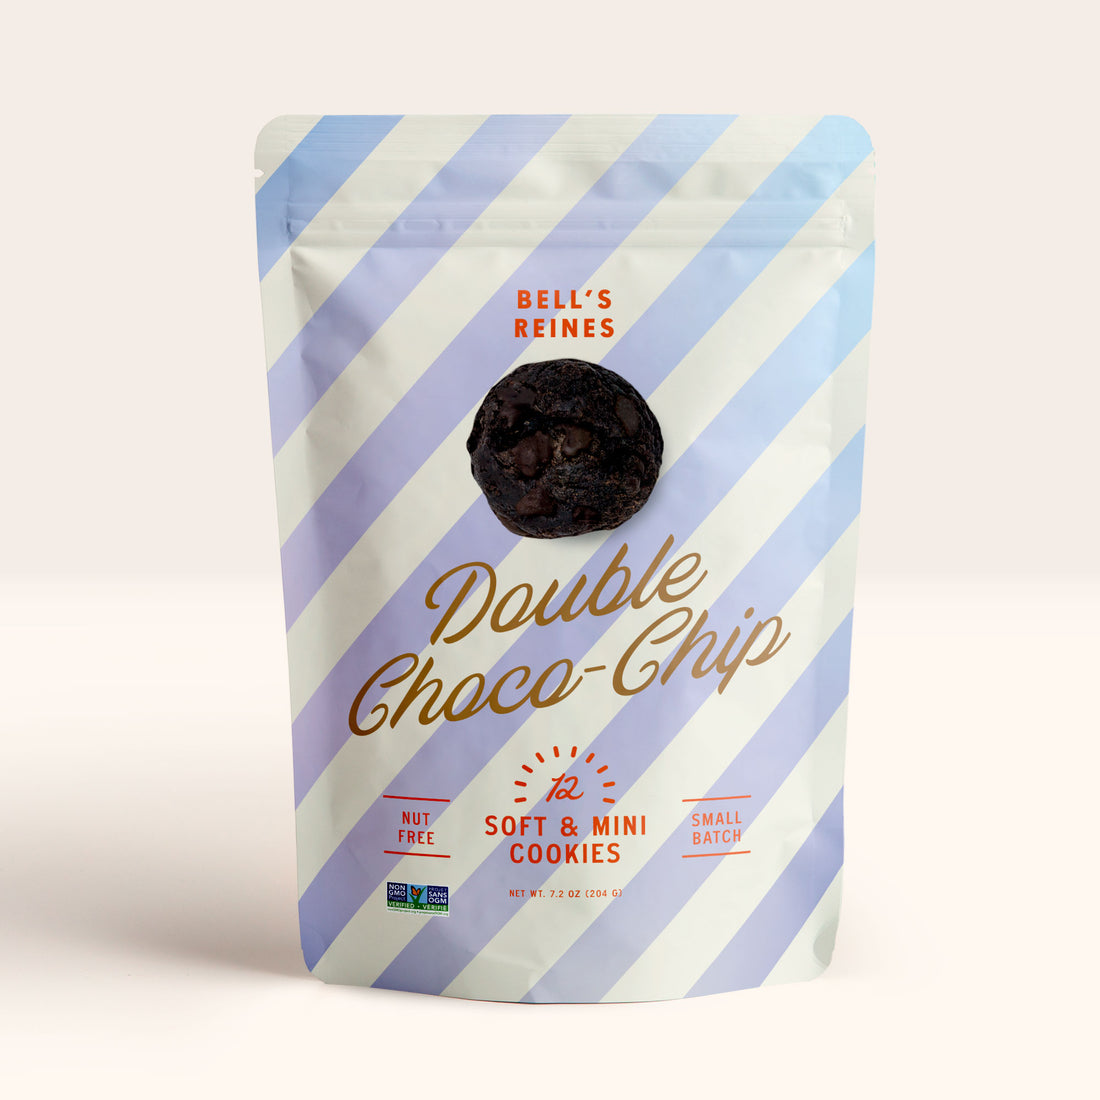 DOUBLE CHOCO CHIP